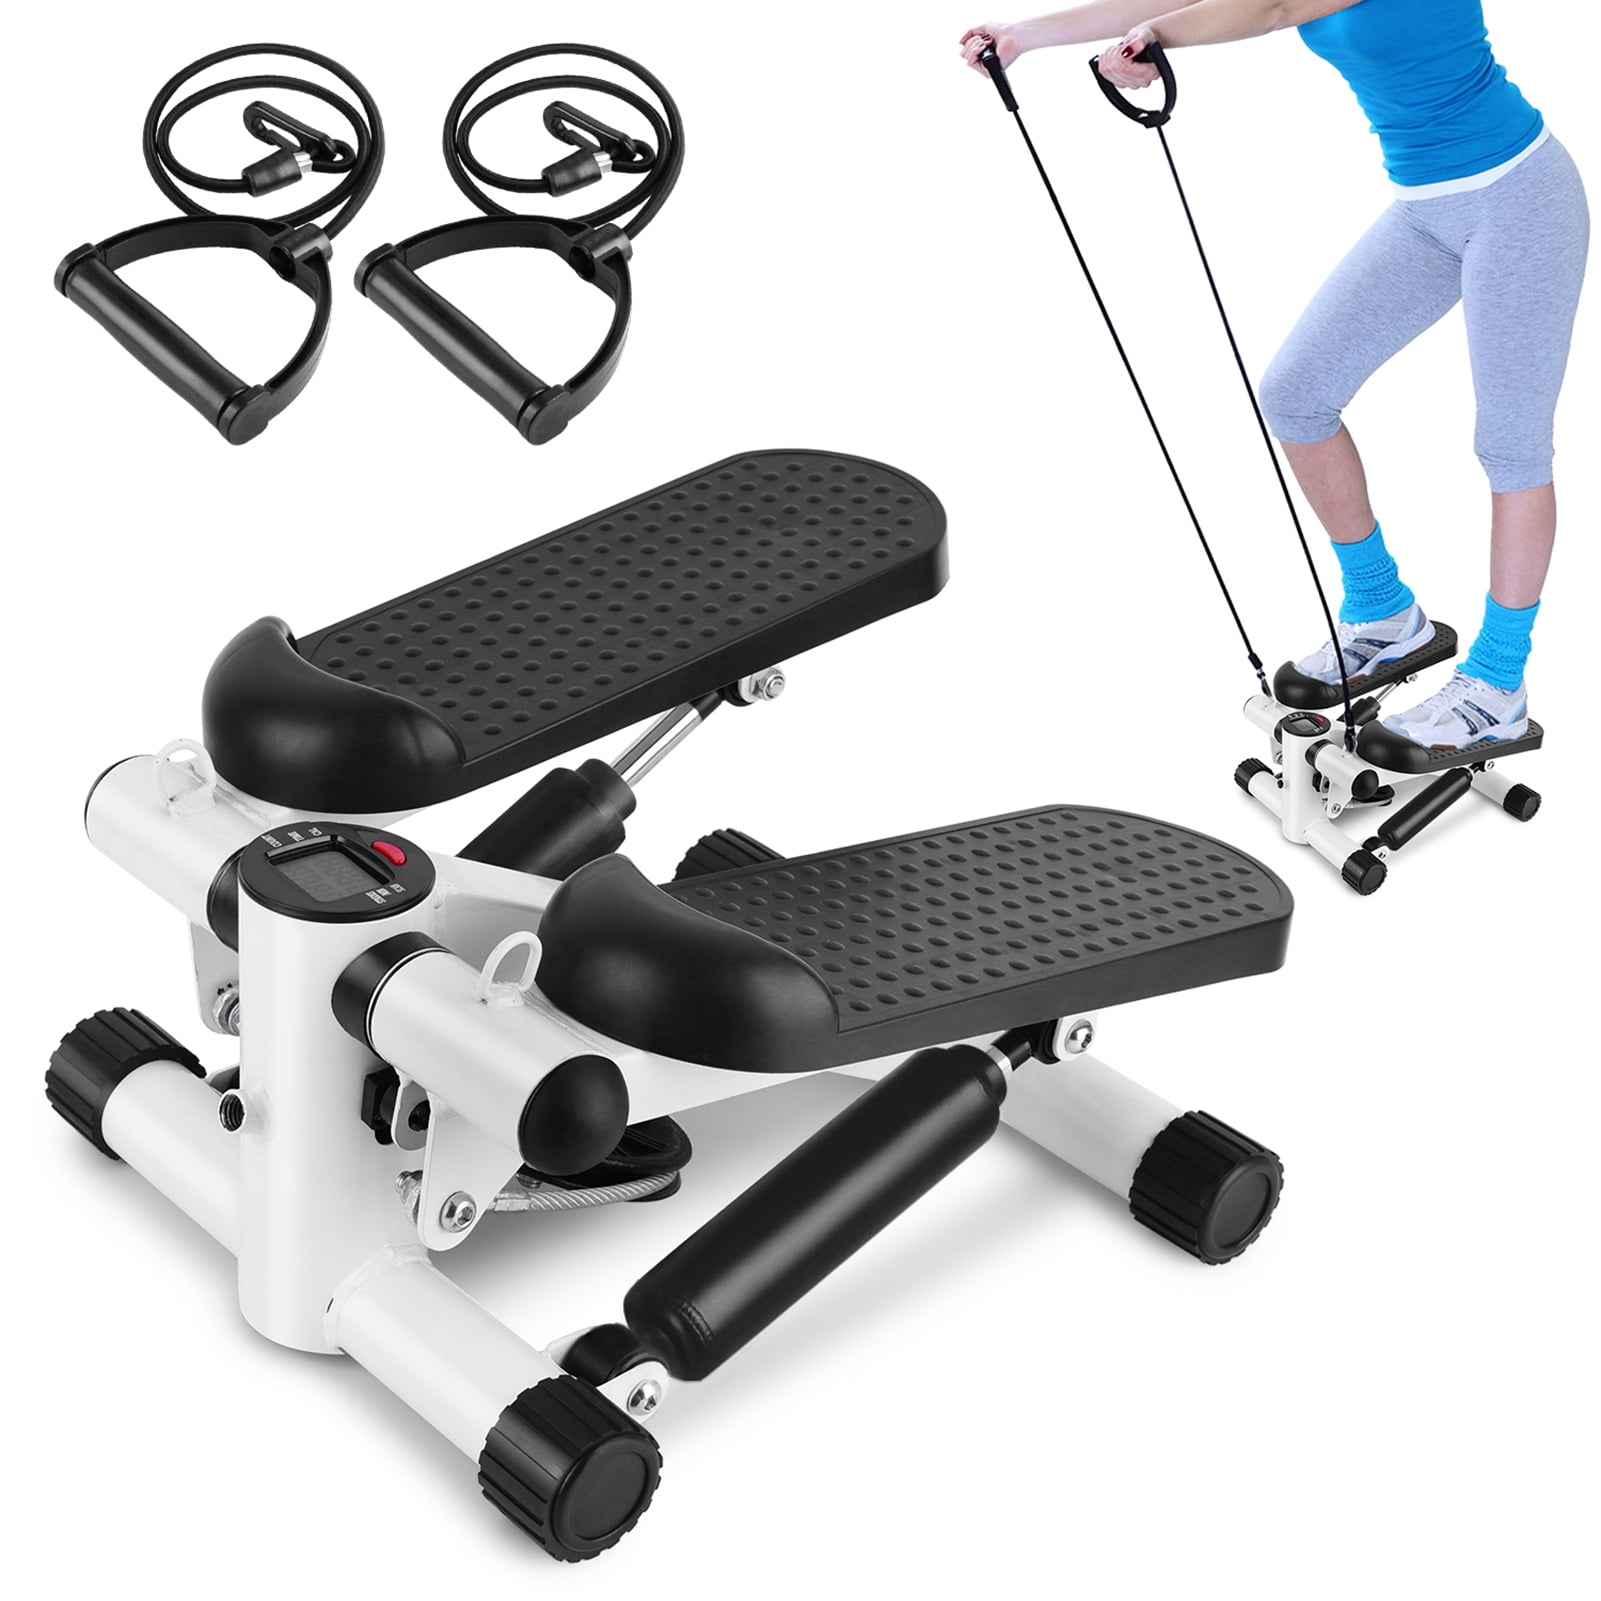 galerij Kanon Vervagen Stamina Mini Stepper with Monitor - Low Impact Black and Gray Stepper-  Great Design for at Home Workouts - Step Machines - Walmart.com